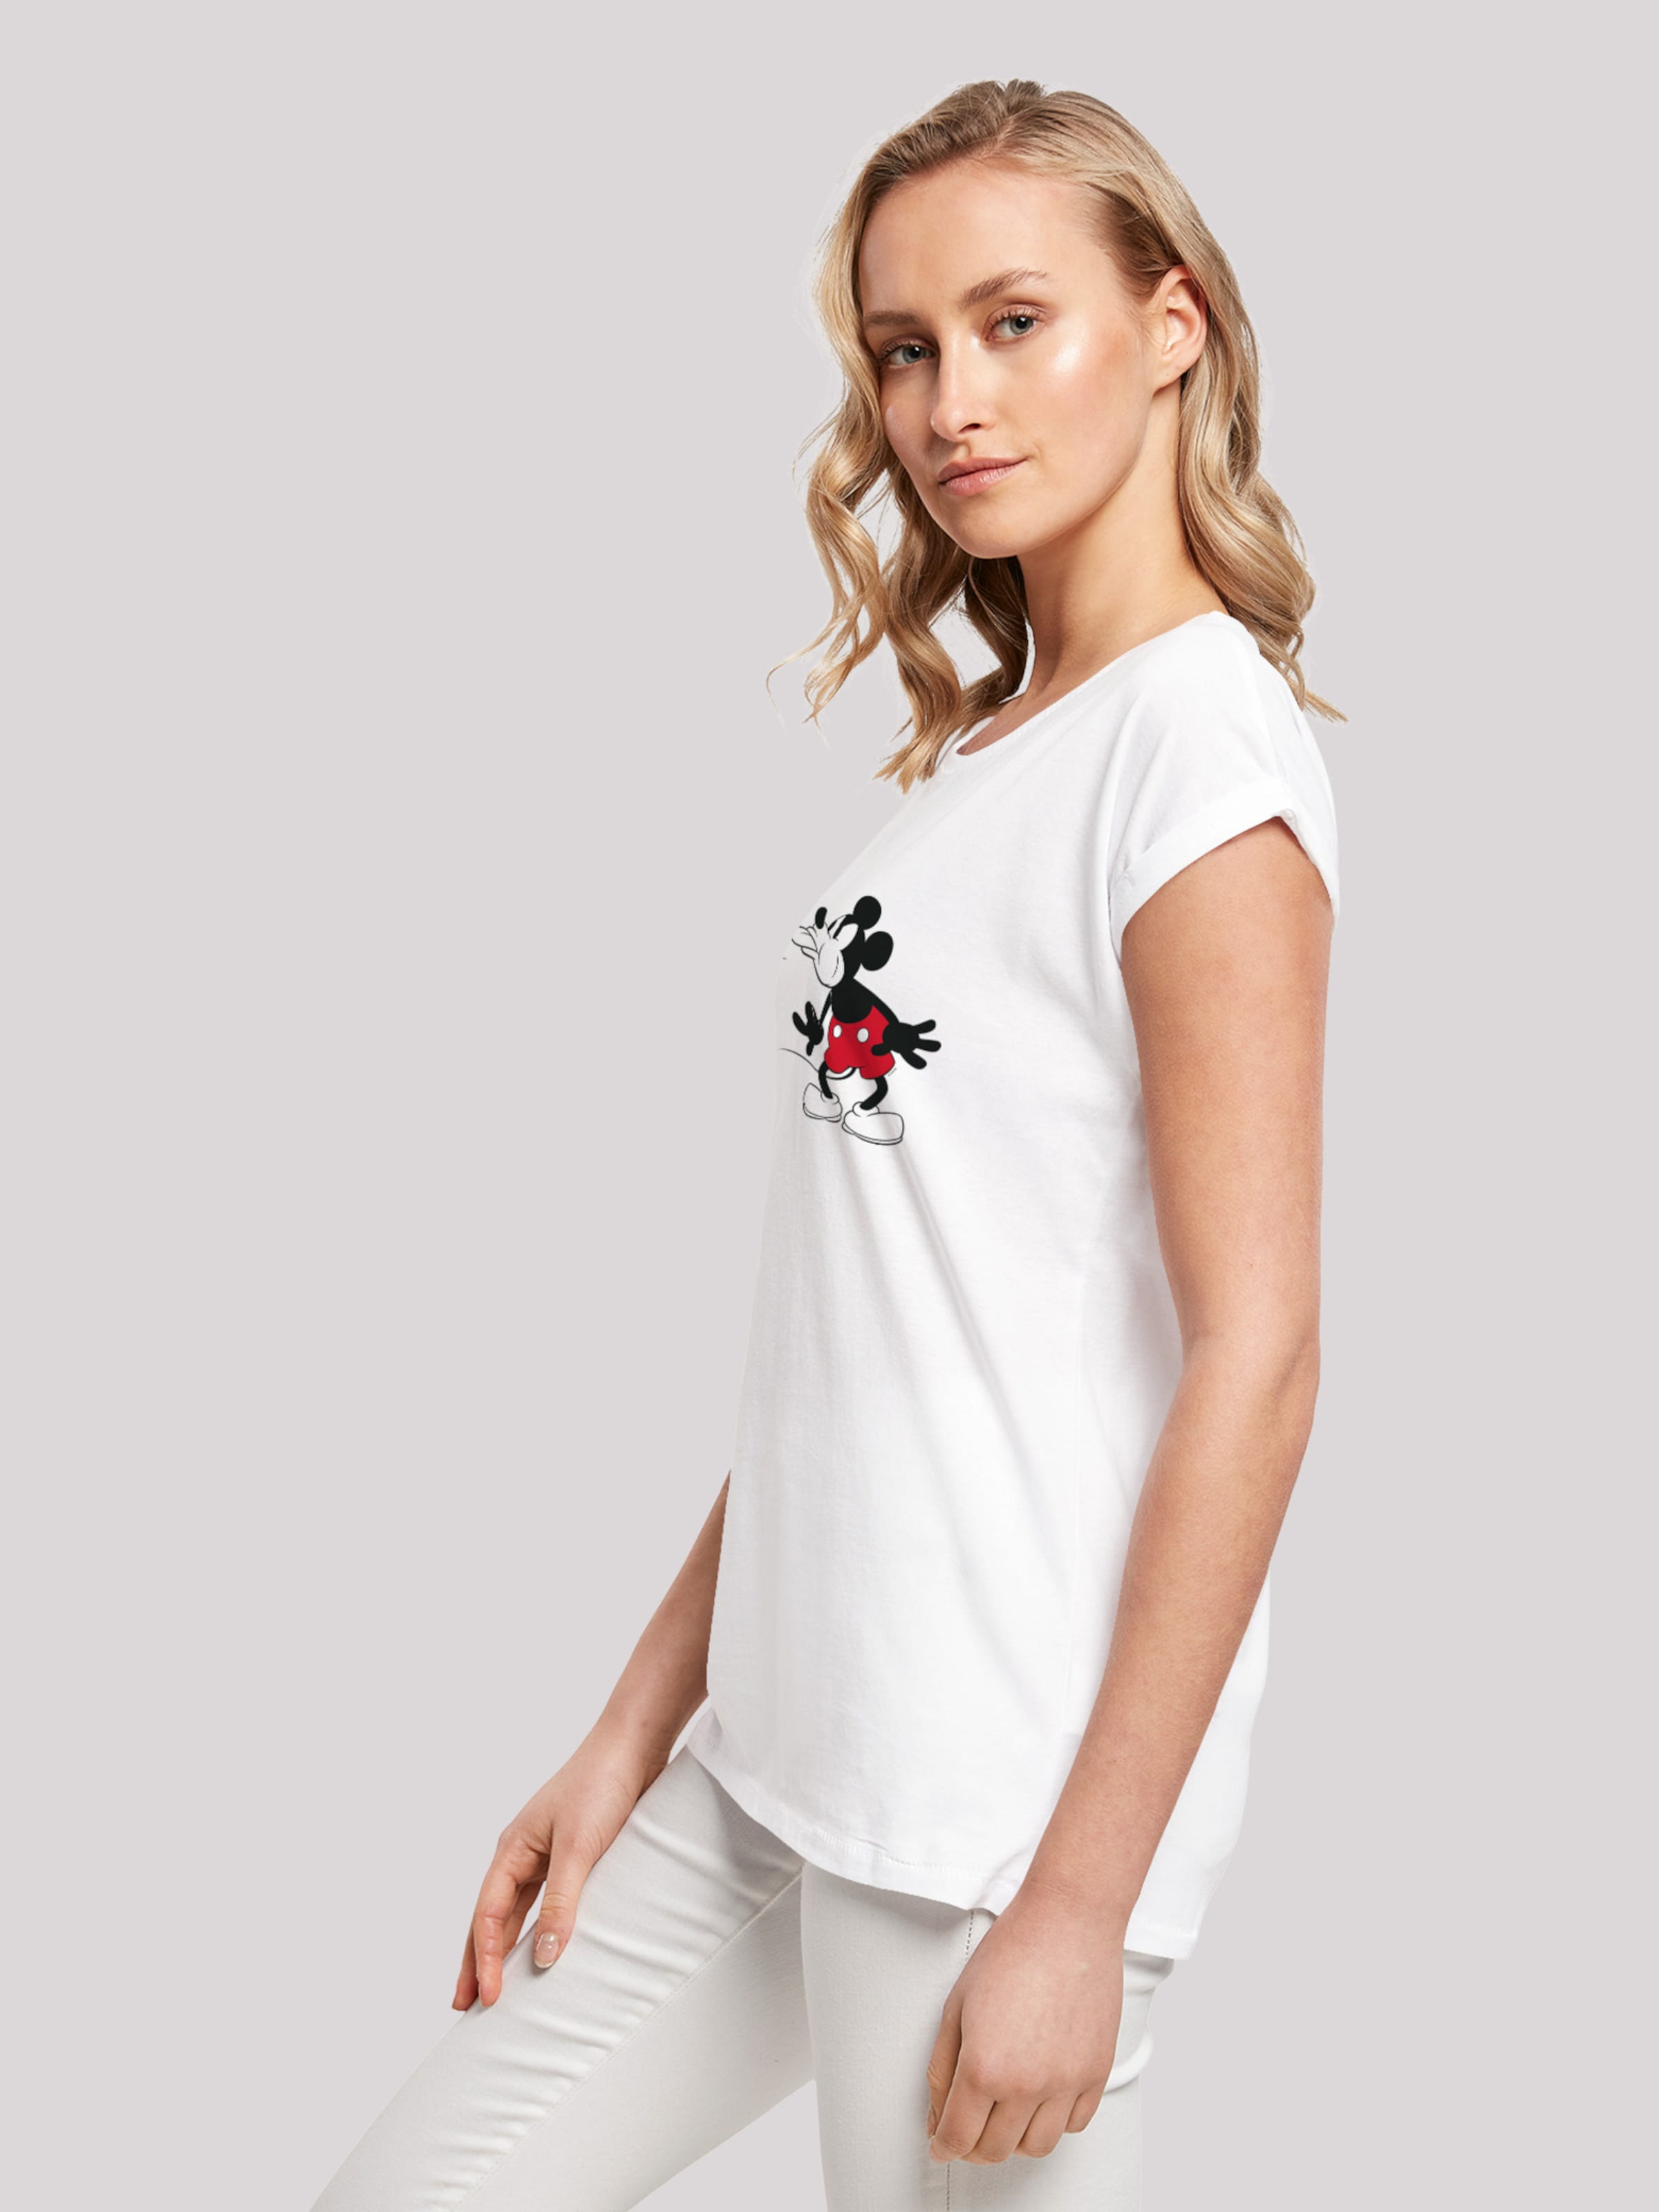 Tongue\' Shirt ABOUT | White Mouse Disney F4NT4STIC \' in Mickey YOU